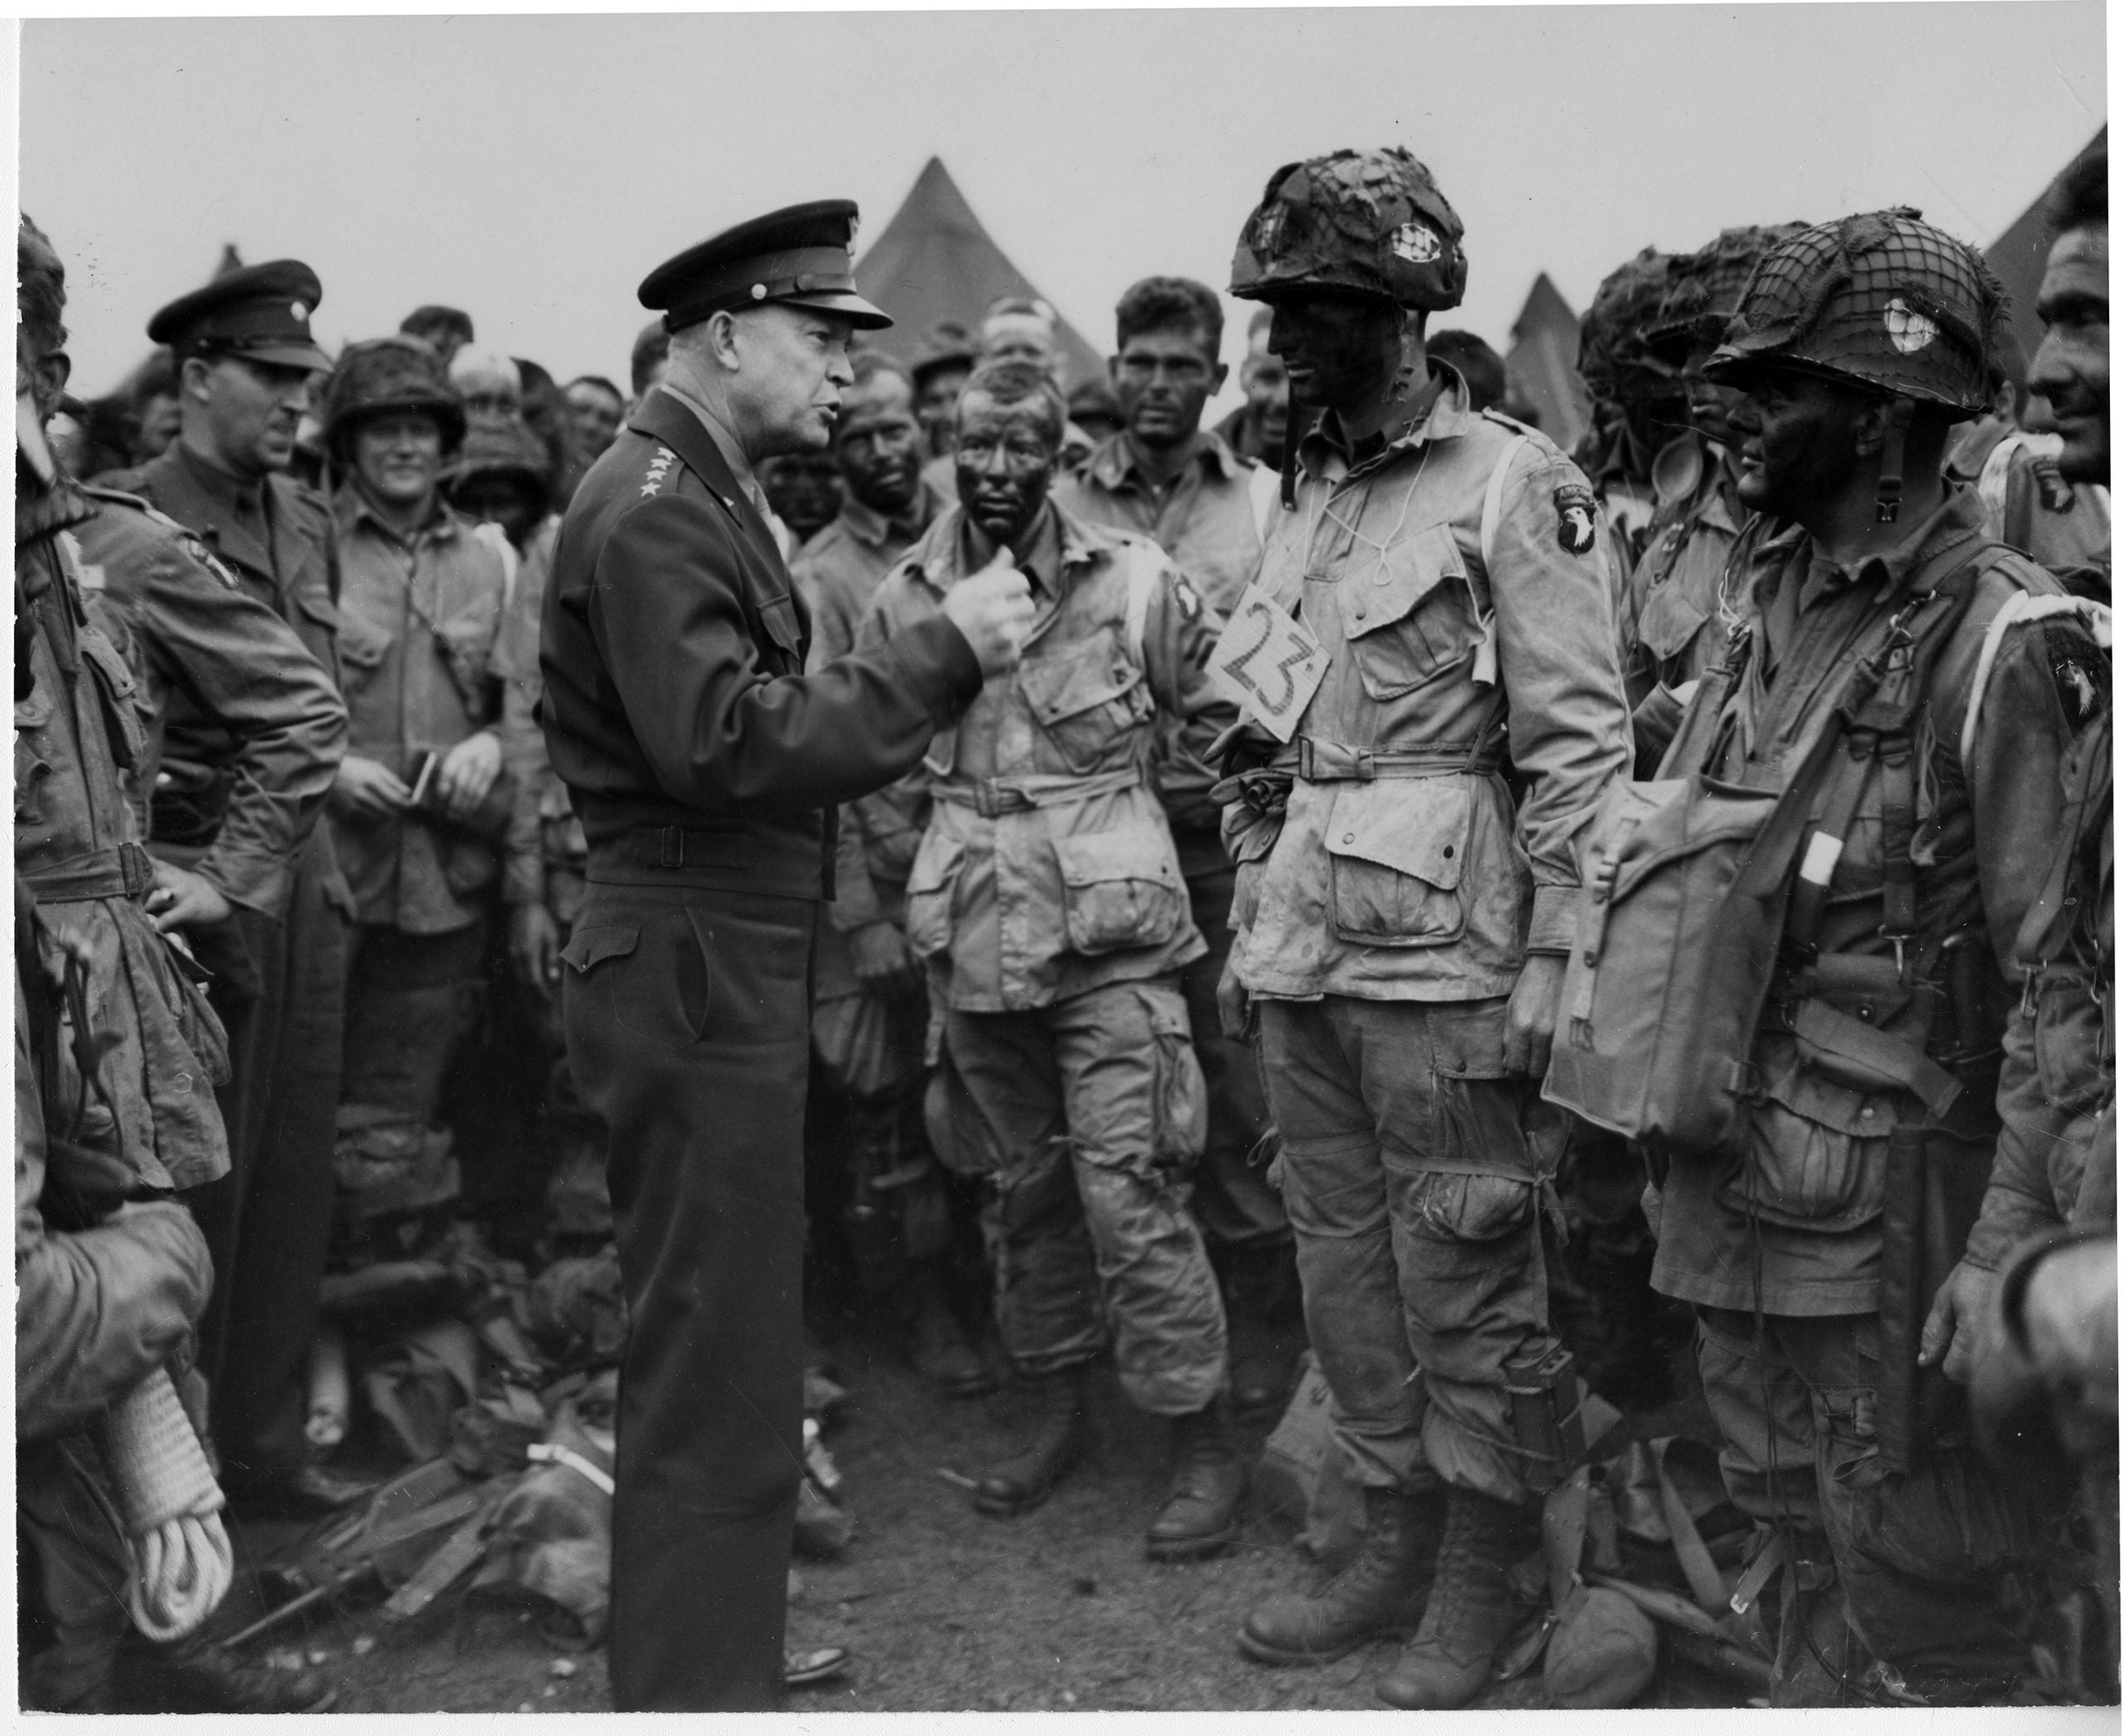 https://www.bretbaier.com/wp-content/uploads/2020/07/ike-with-soldiers-scaled.jpg